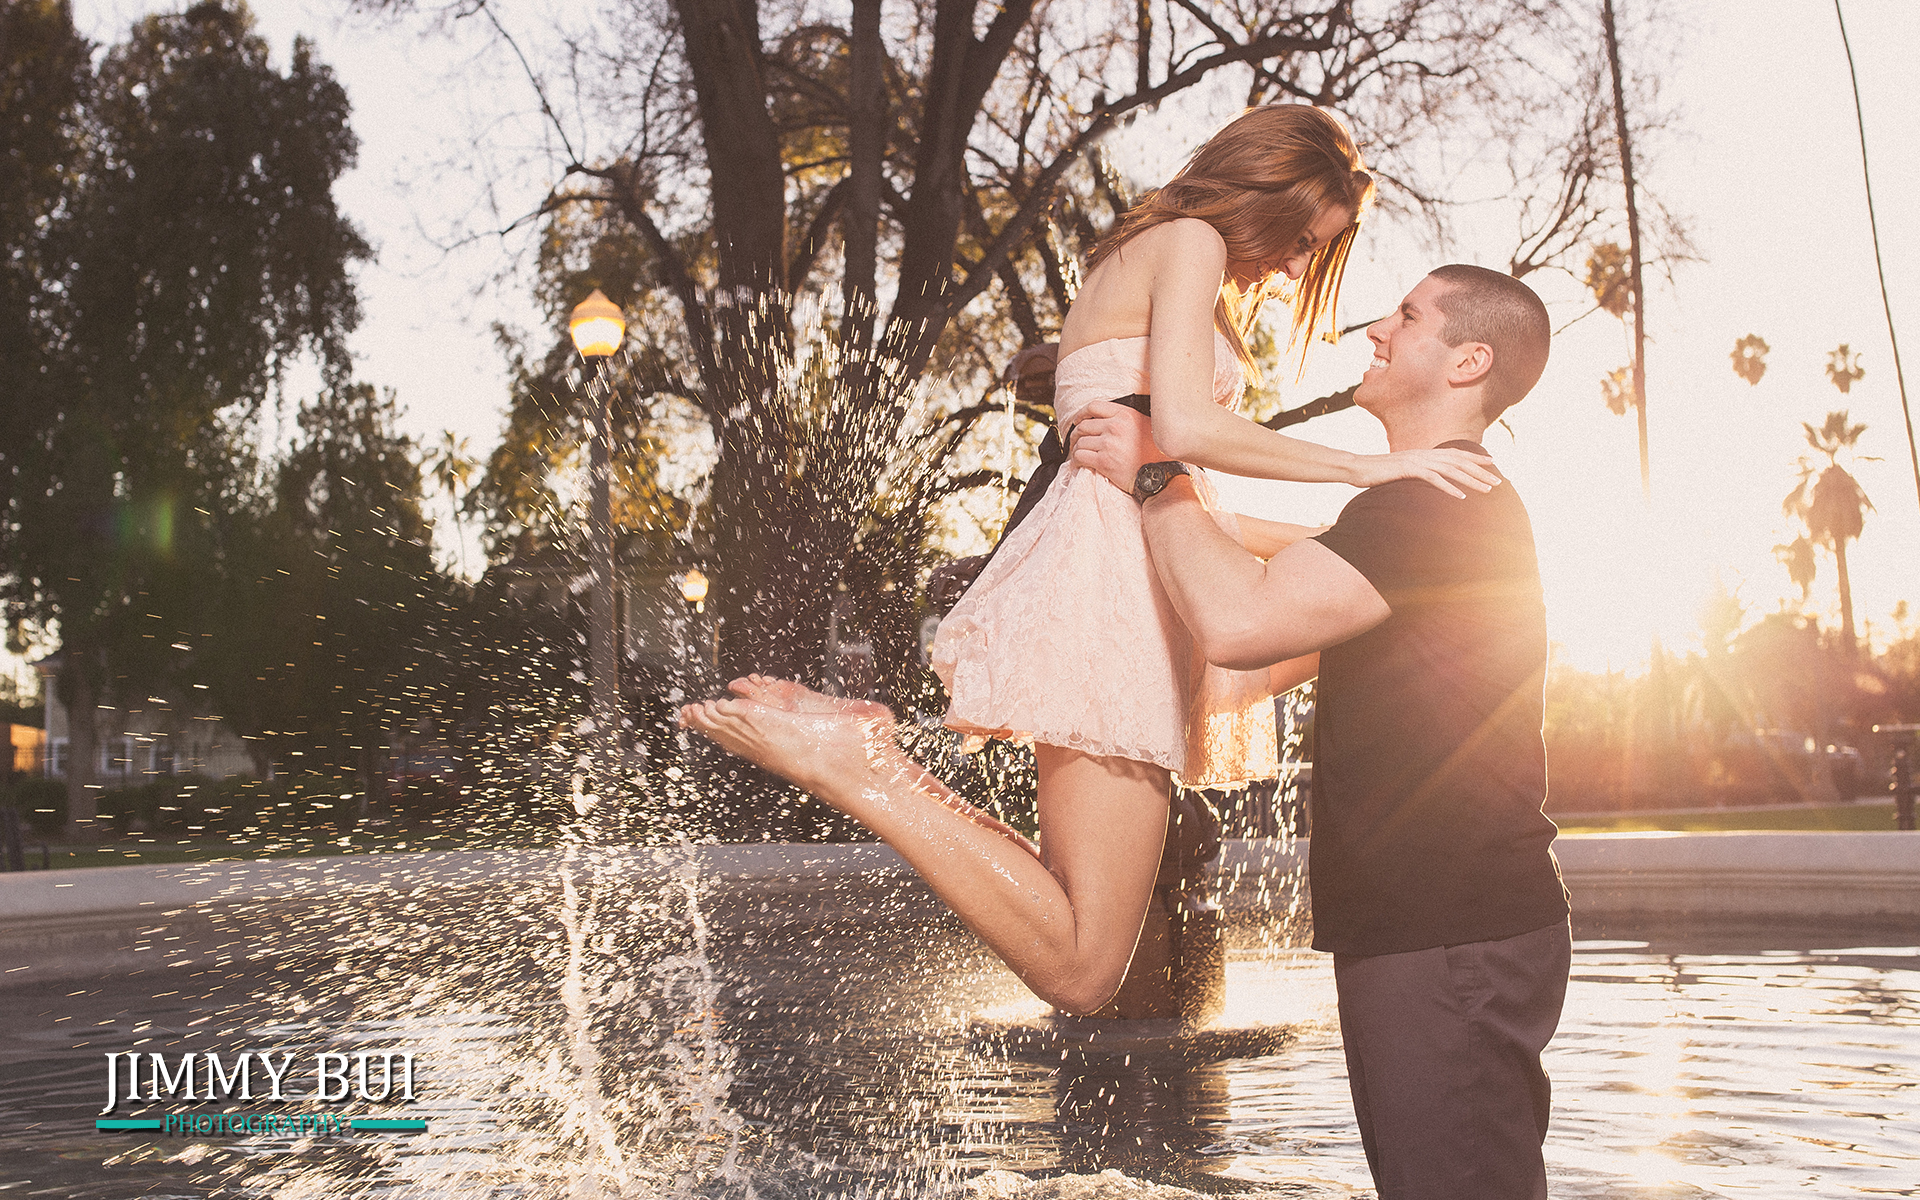 man lifting fiance over fountain during sunset